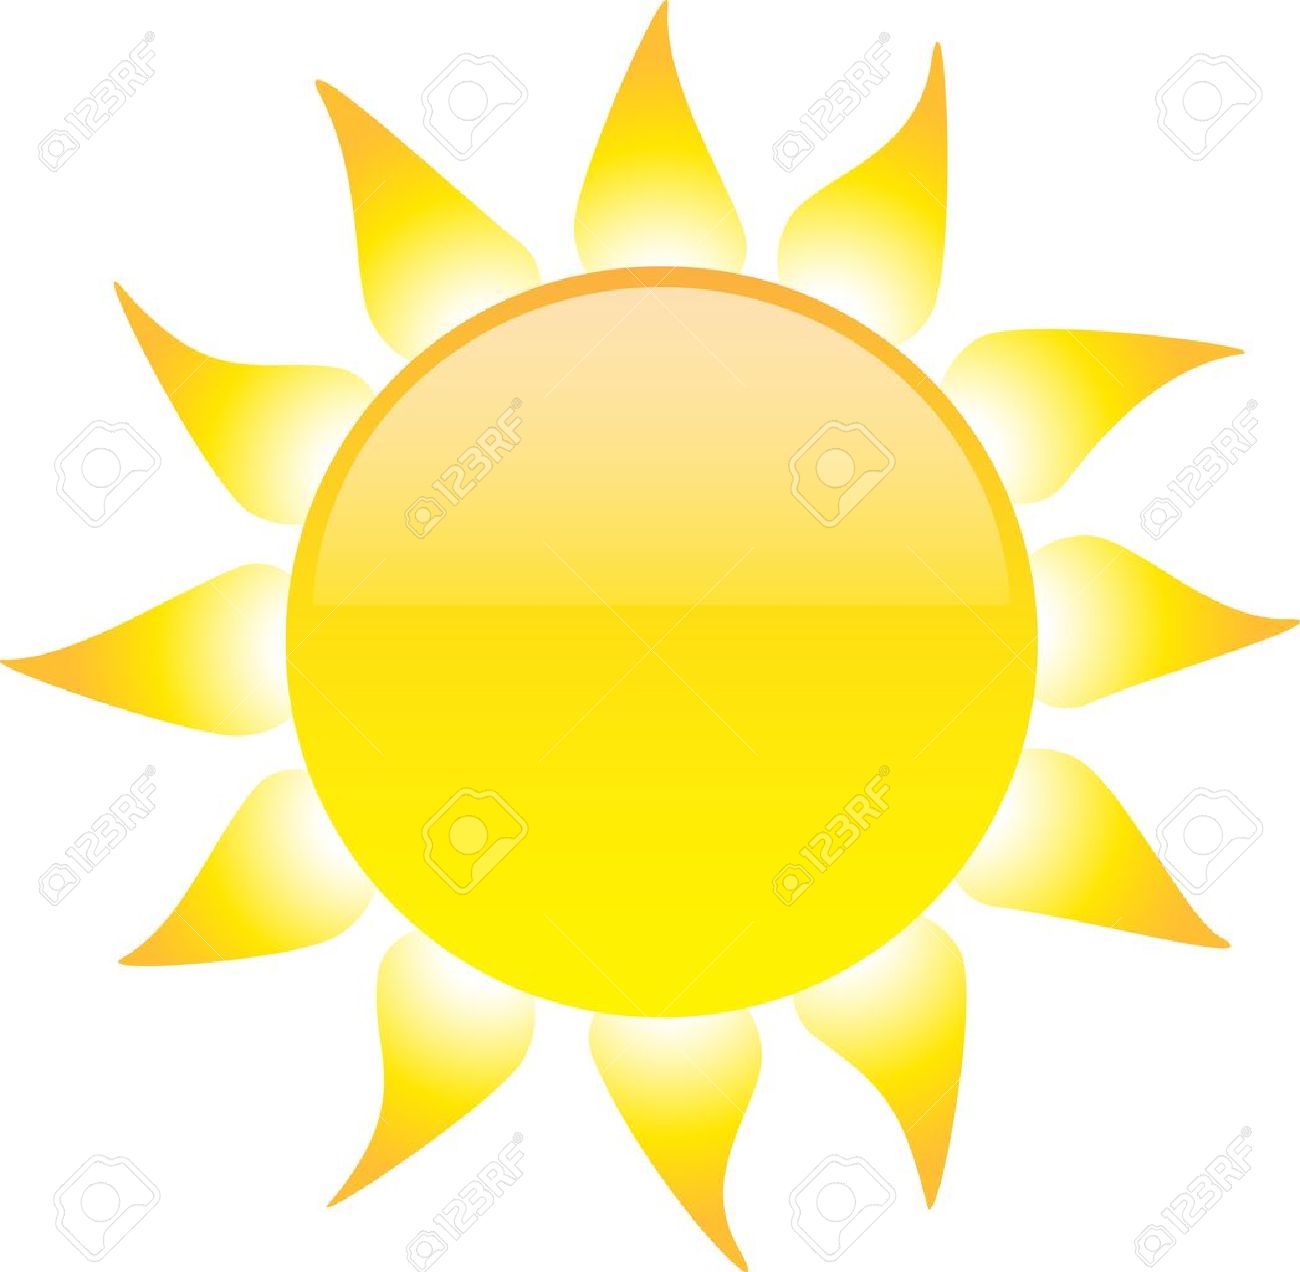 Sun clipart white background pencil and in color sun jpg